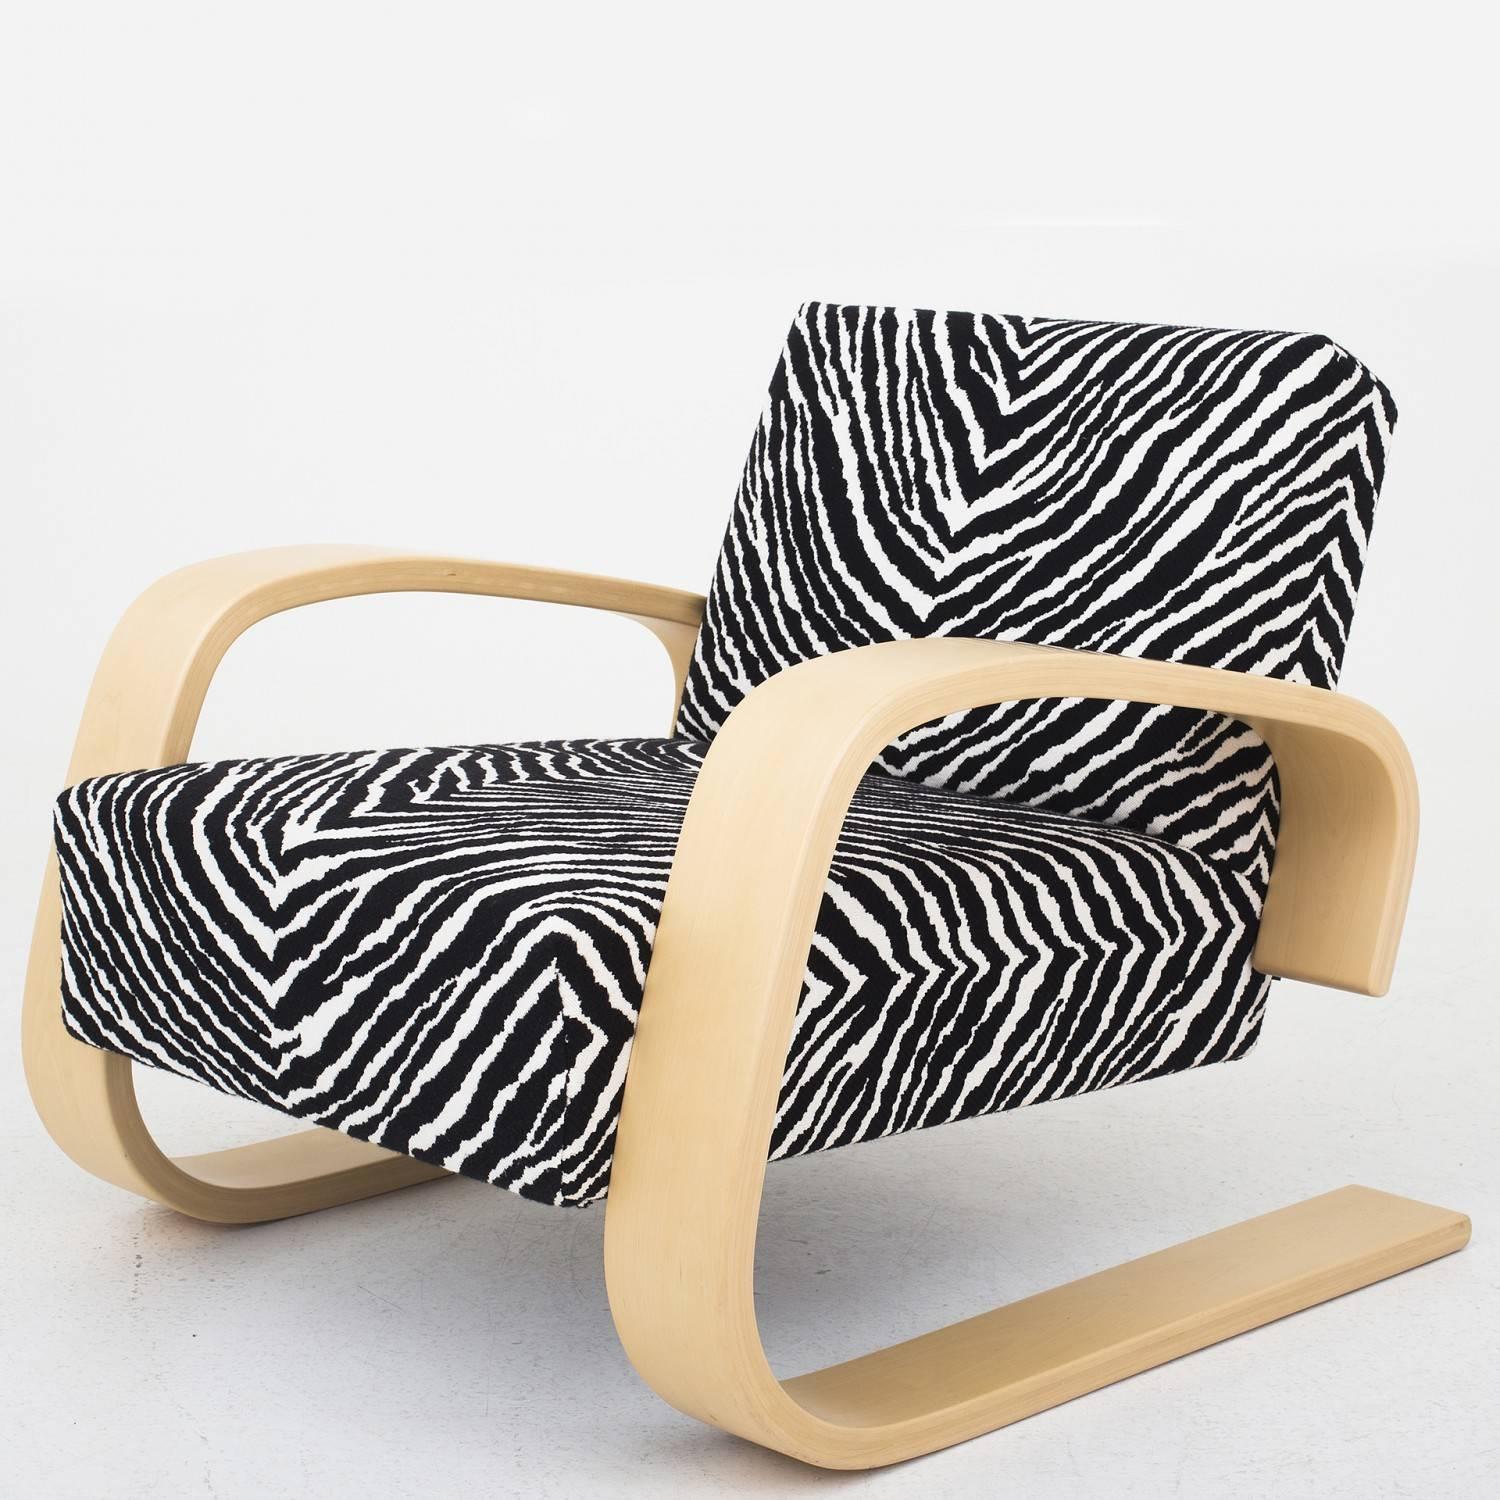 A pair of Tank chairs, model 400 in beech and fabric. Designed by Alvar Alto and produced by Artek.